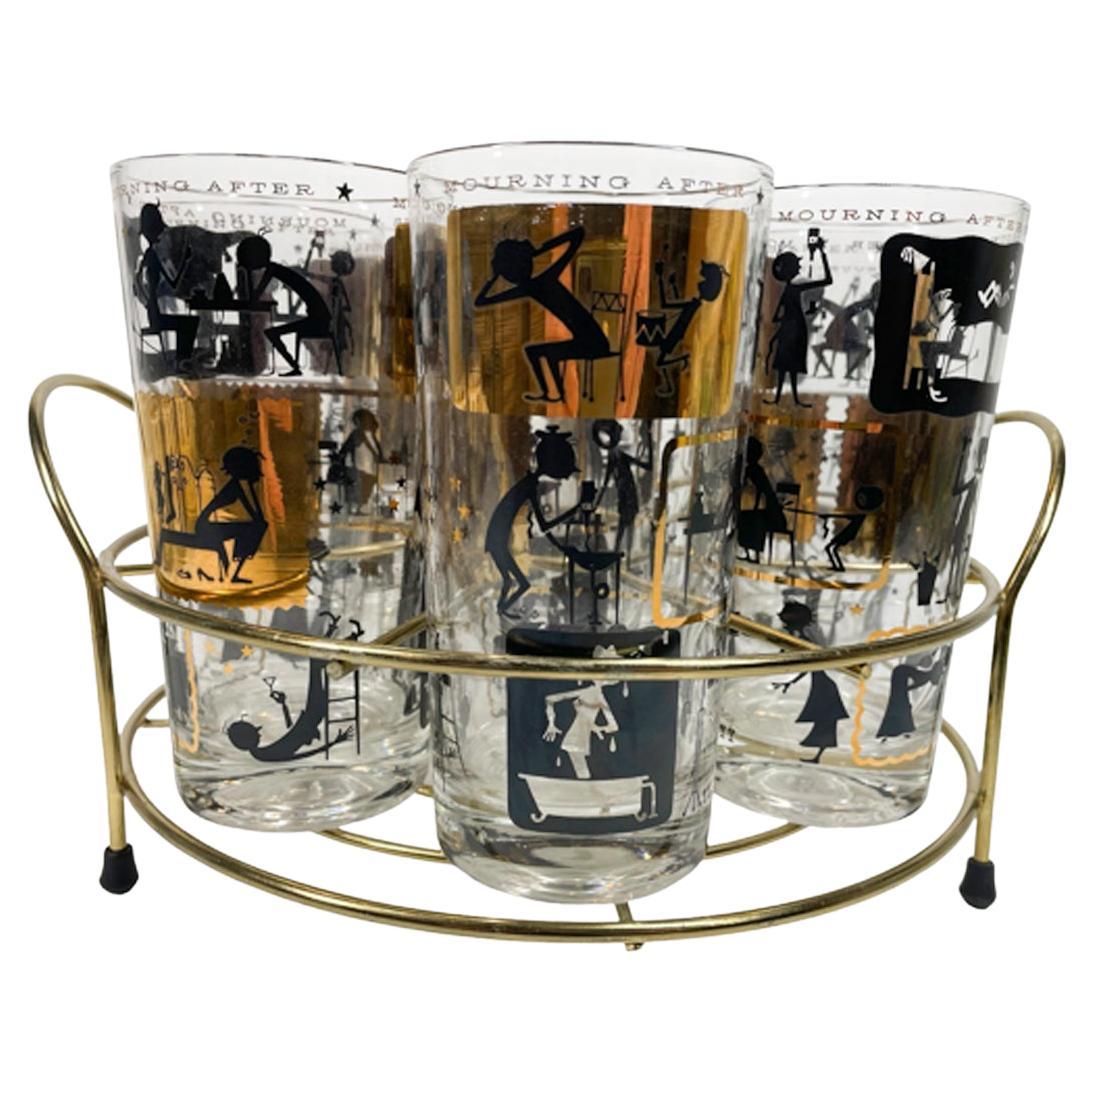 https://a.1stdibscdn.com/mid-century-modern-cera-glass-mourning-after-satirical-highball-glasses-for-sale/f_73712/f_360069921693761452141/f_36006992_1693761452510_bg_processed.jpg